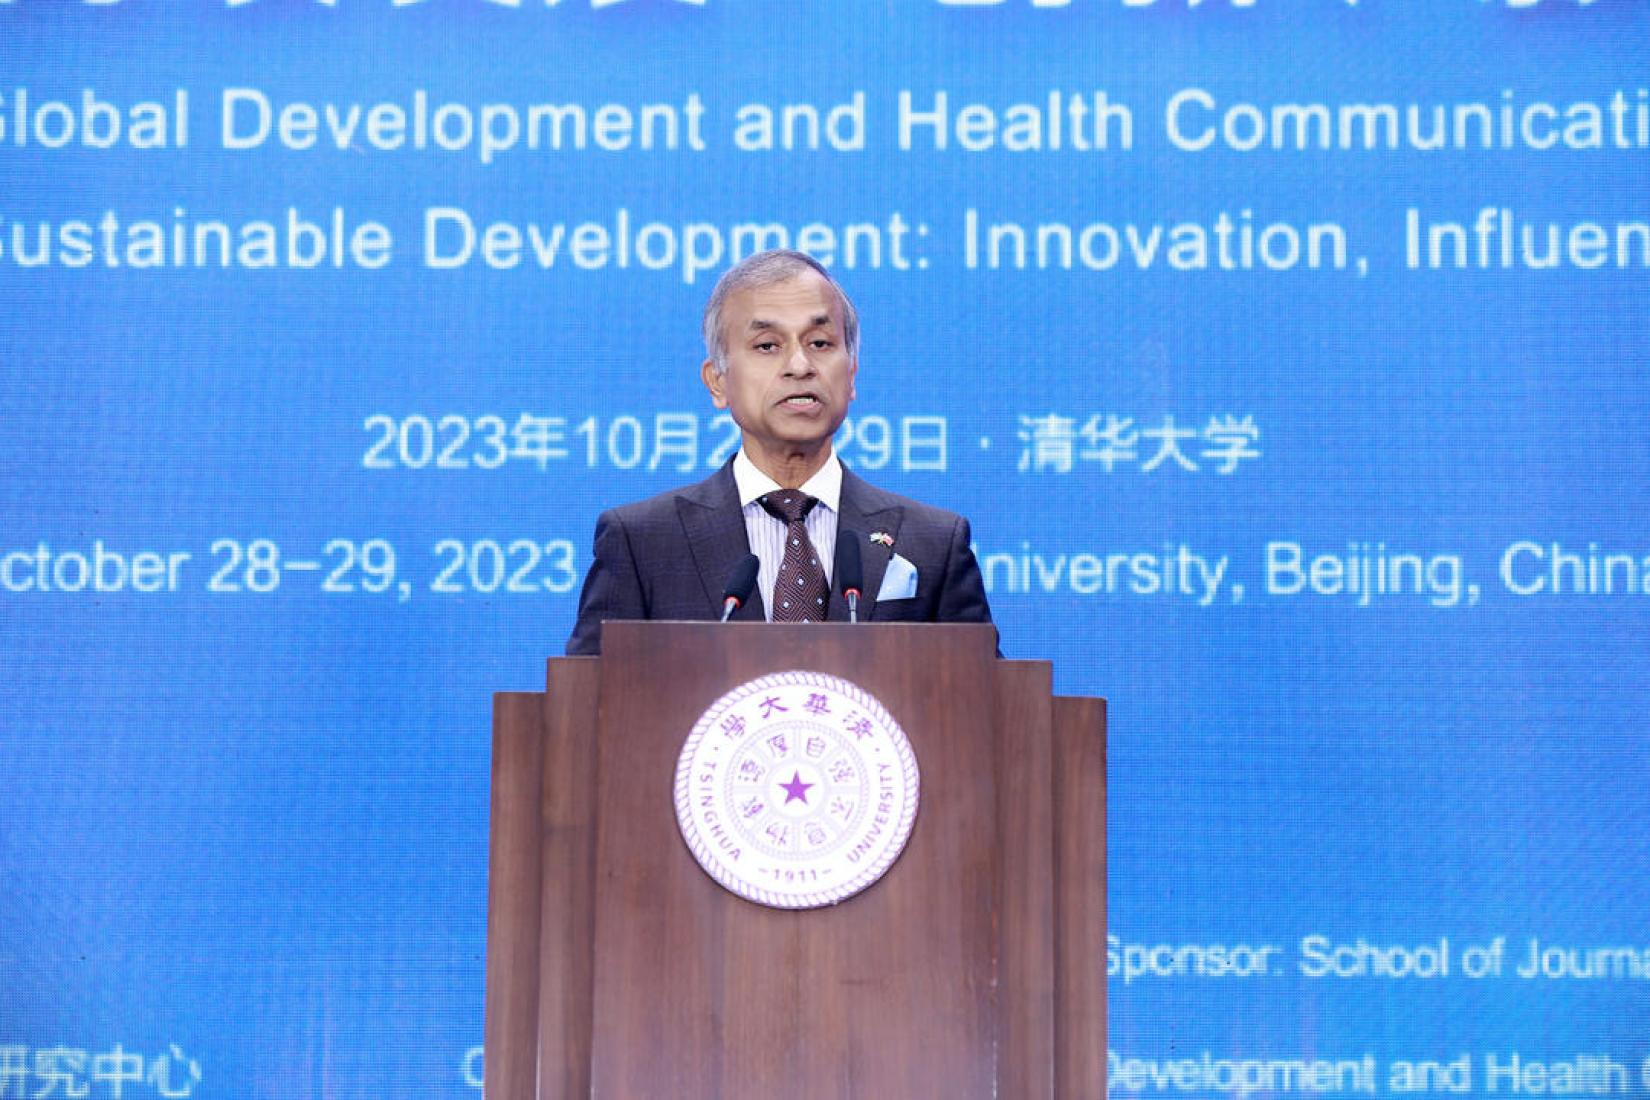 UN Resident Coordinator in China Siddharth Chatterjee at the 2nd Global Development and Health Communication Forum